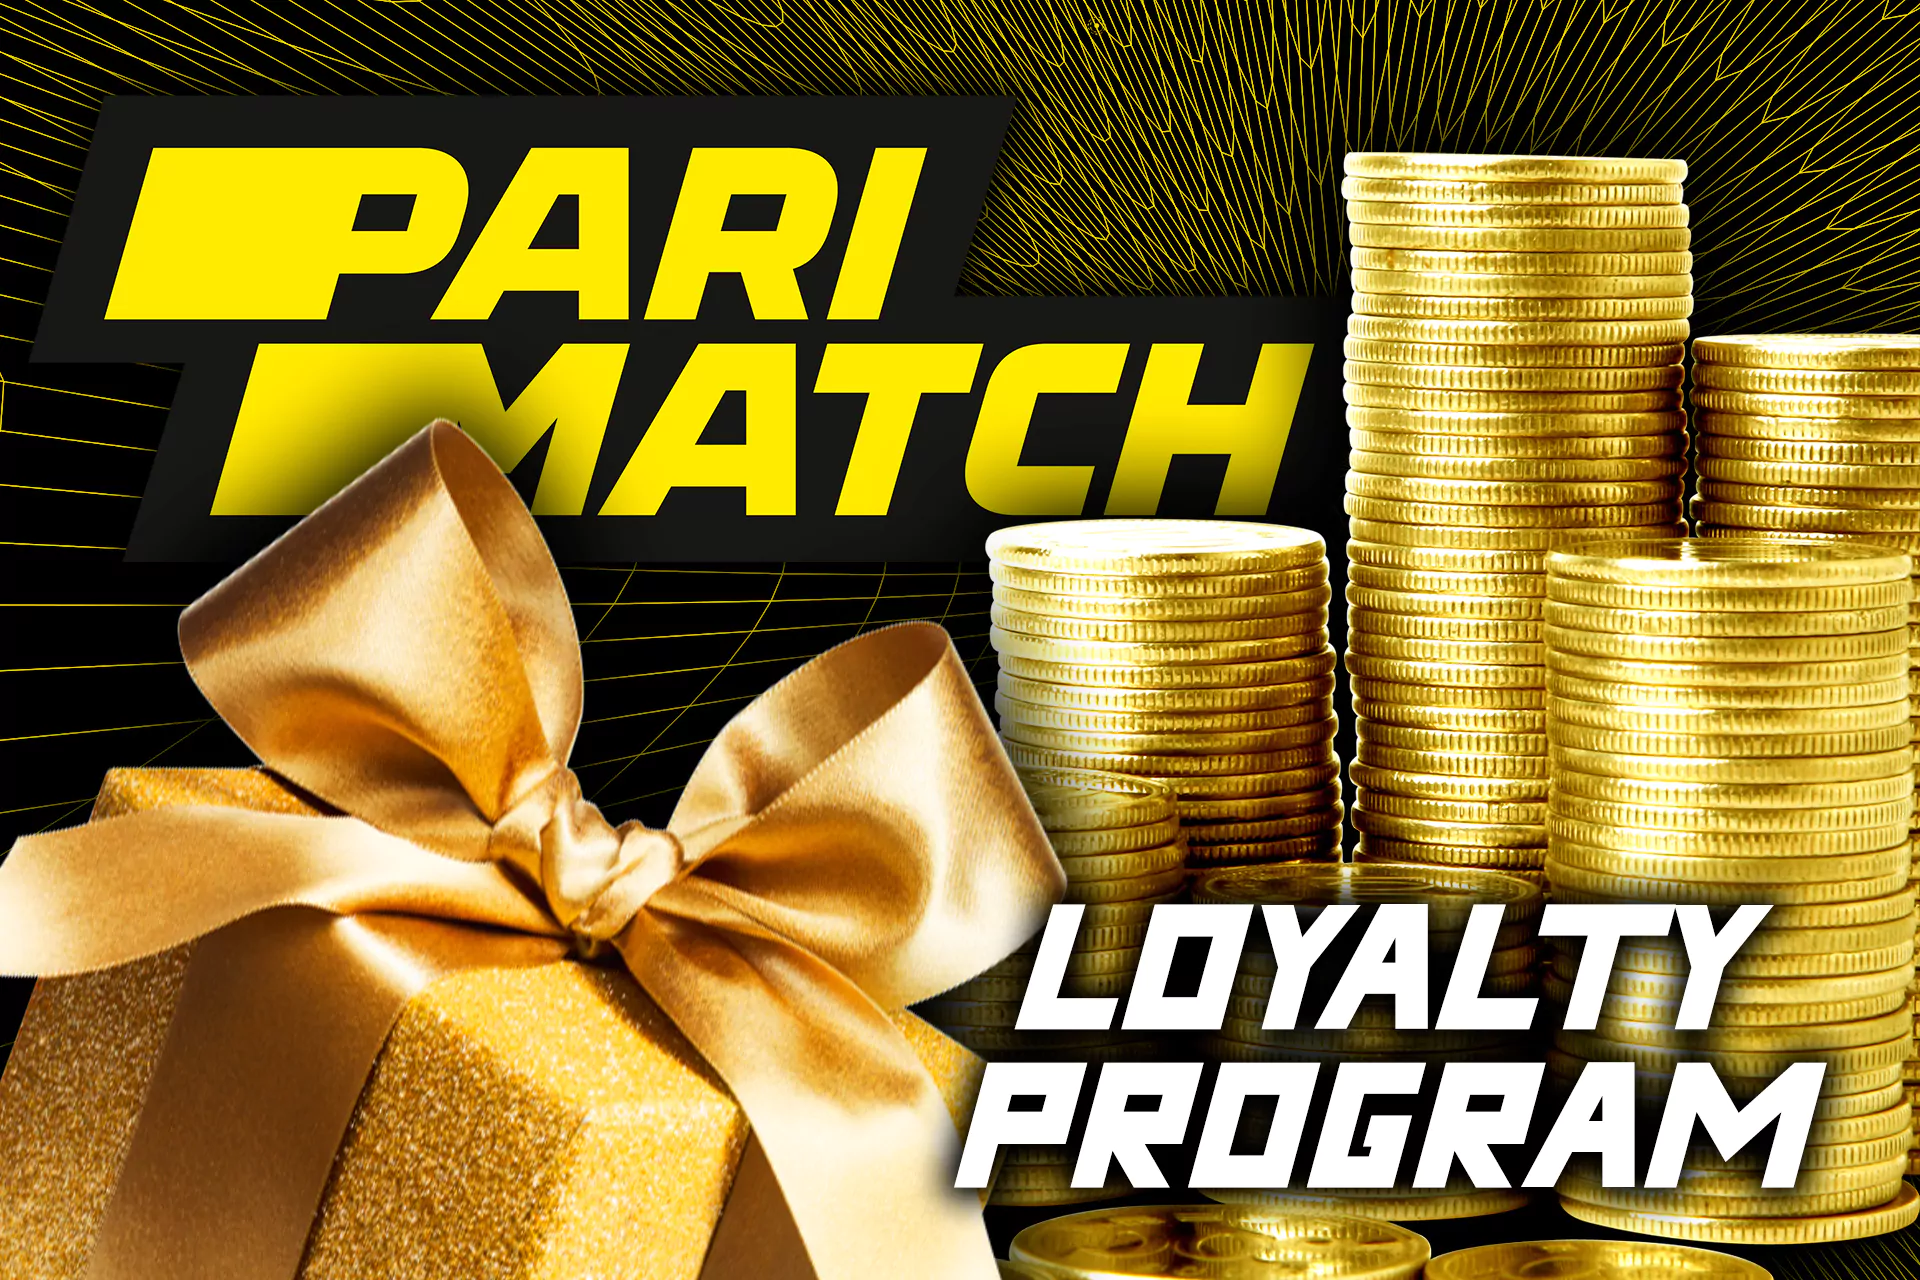 There are lots of bonus offers for new and regular bettors and casino players at Parimatch.